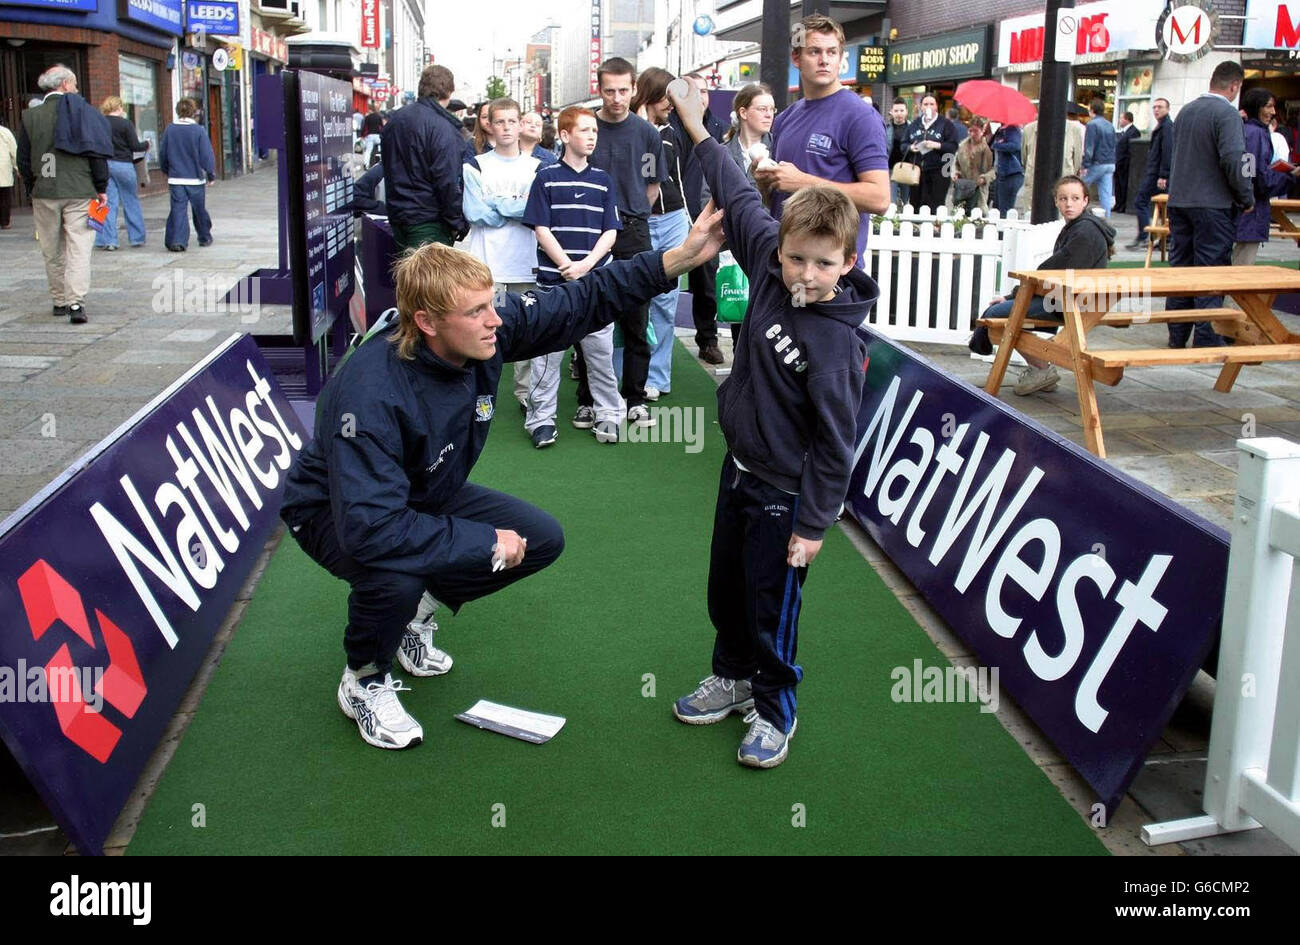 Durham cricketer Mark Davies gives seven-year-old Reece Morgan a few bowling tips, during the NatWest Interactive Roadshow in Newcastle. The youngster, from Pelaw, Gateshead, was there to see the cricketer take part in the NatWest Speed Challenge in the city's Haymarket. Stock Photo